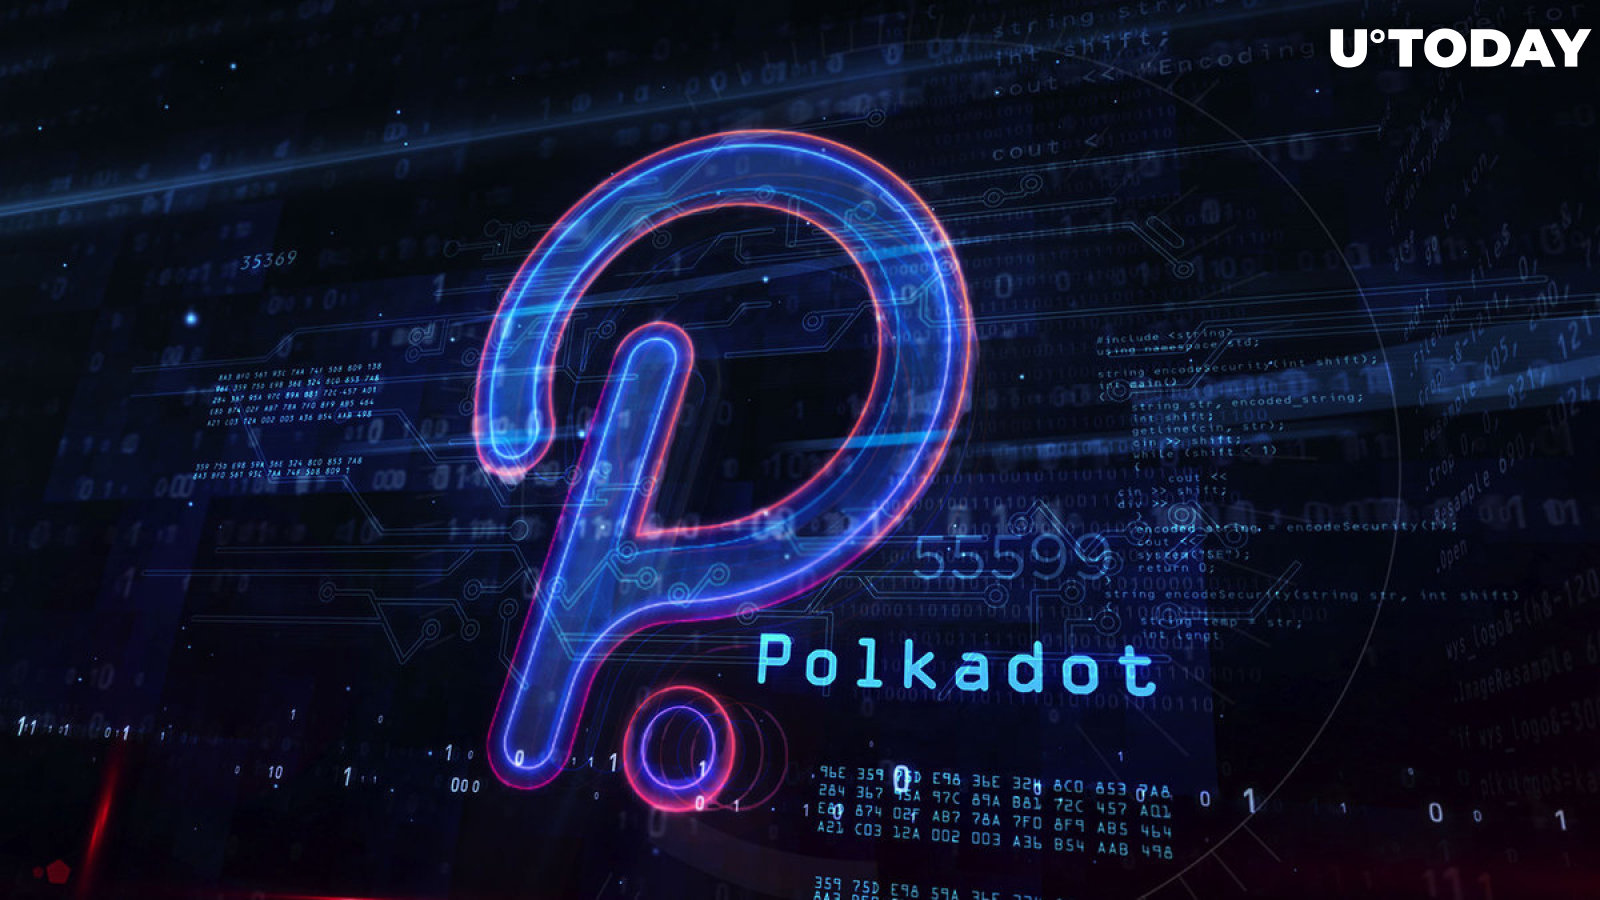 Polkadot (DOT) Price Set for Breakout as Latest Parachain Winner Is Unveiled